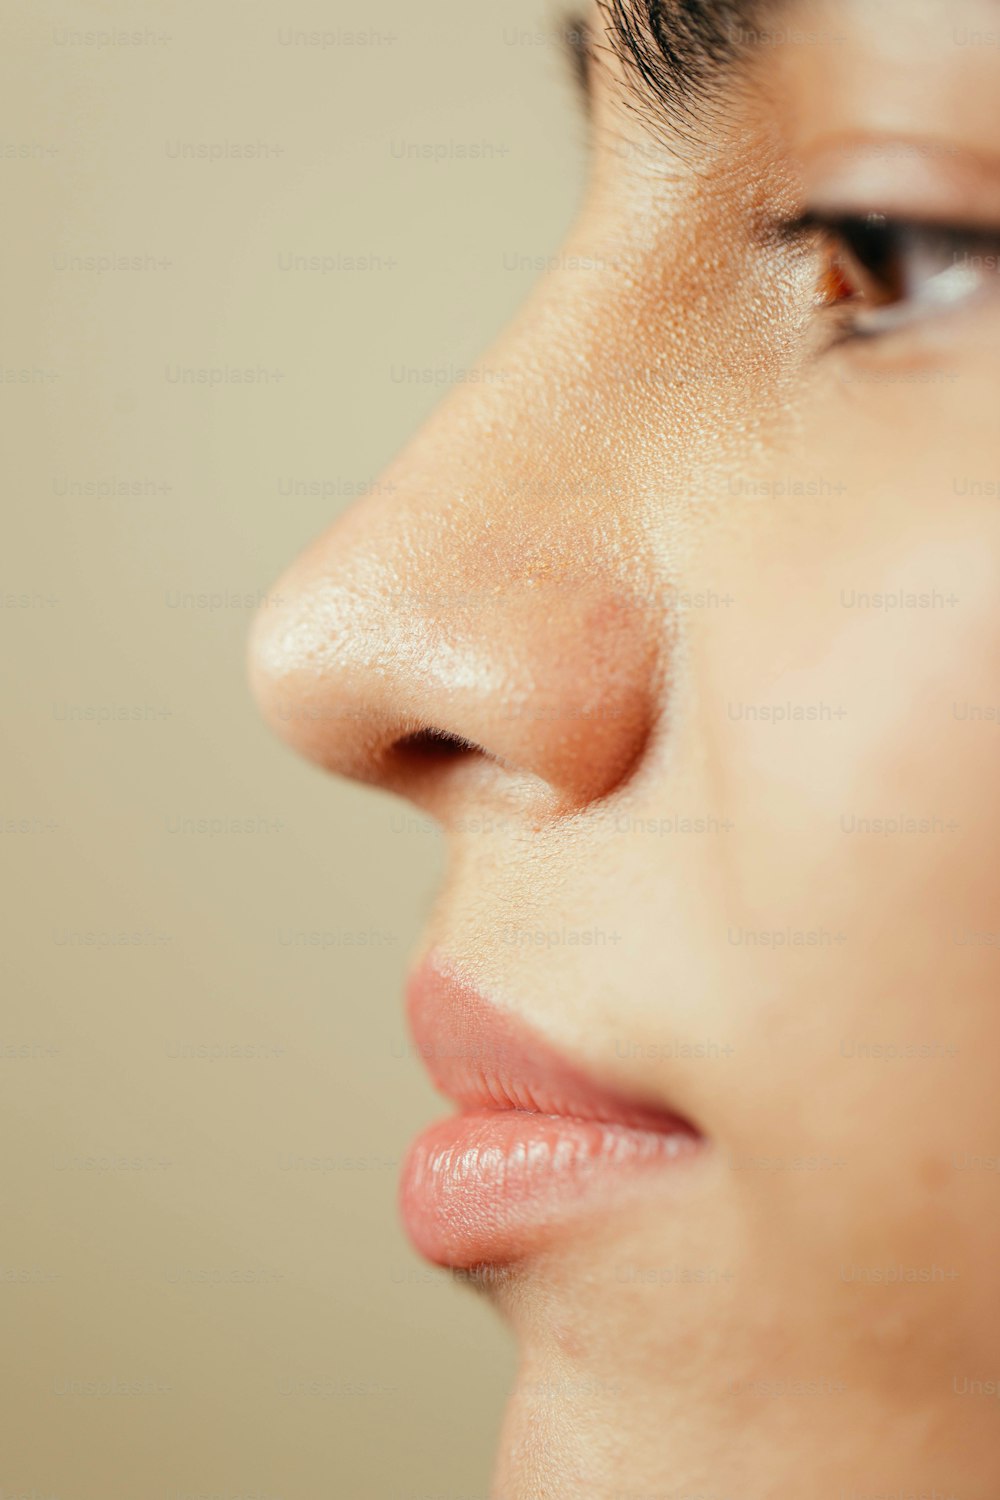 a close up of a woman's nose and nose